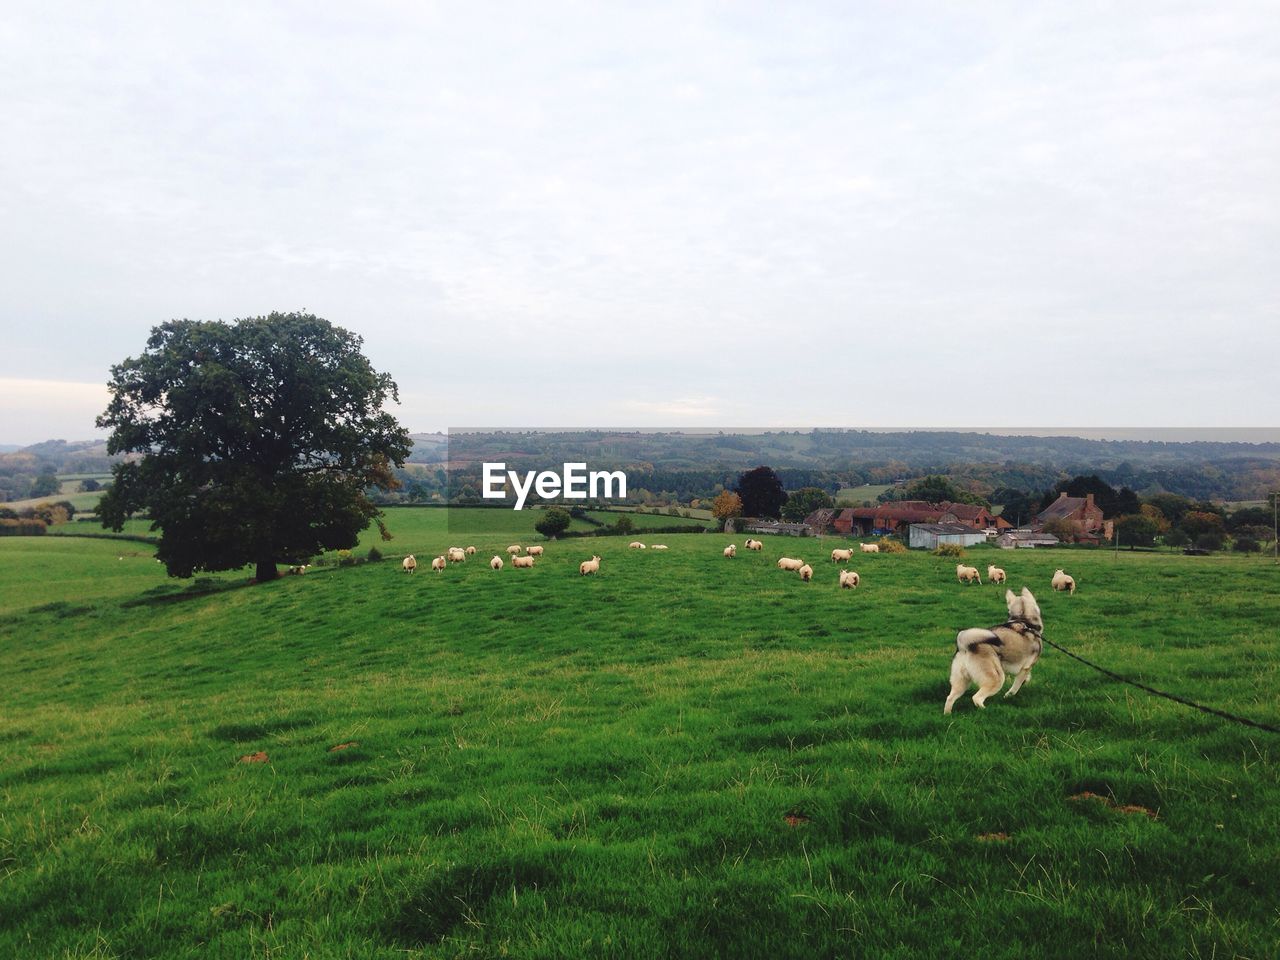 Dog and flock of sheep on grassy field against sky